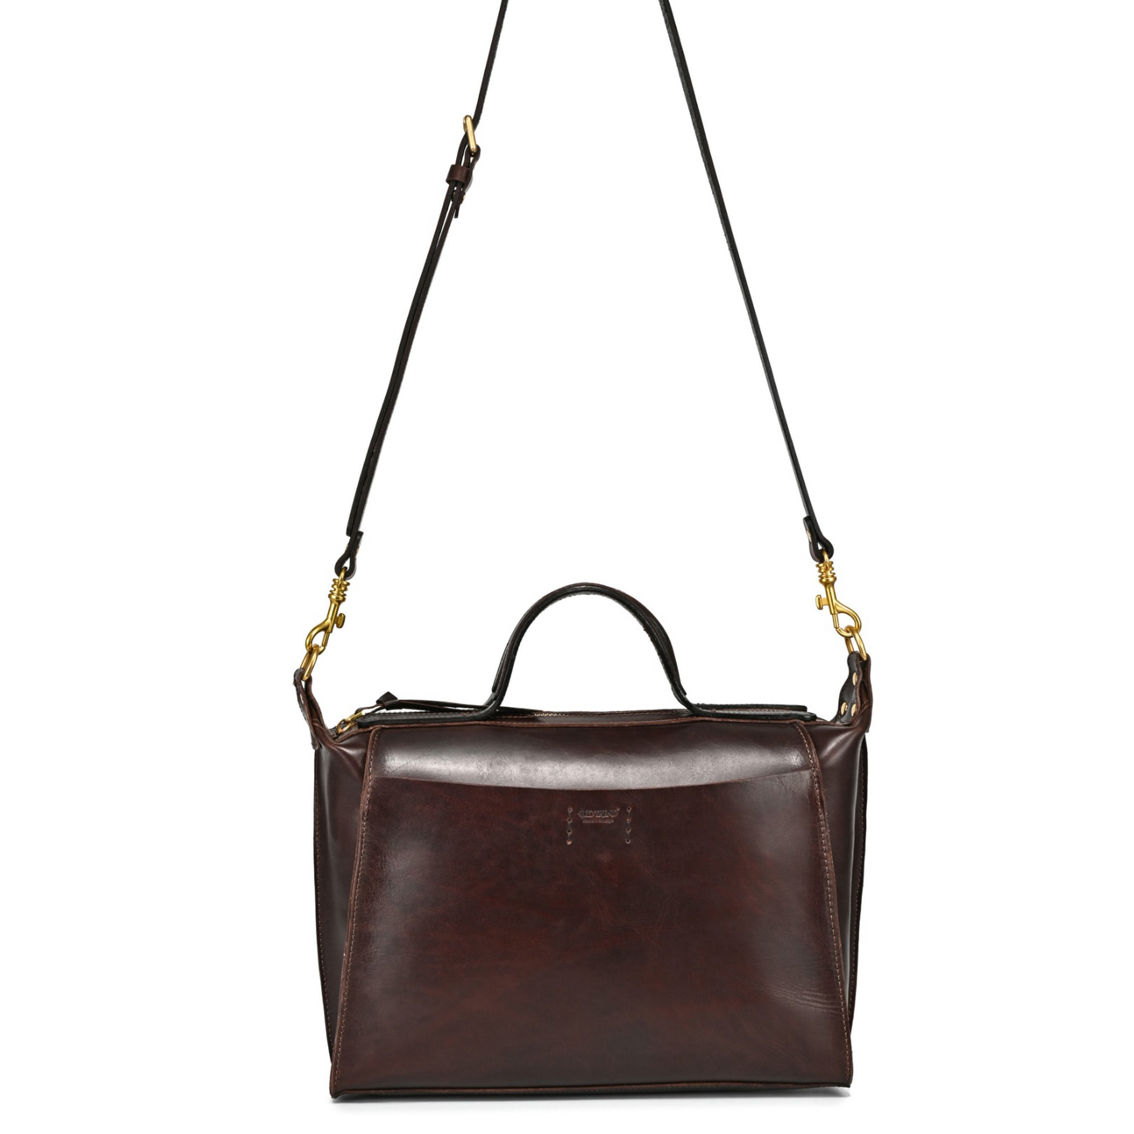 Old Trend Gypsy Soul Leather Satchel - Image 3 of 5